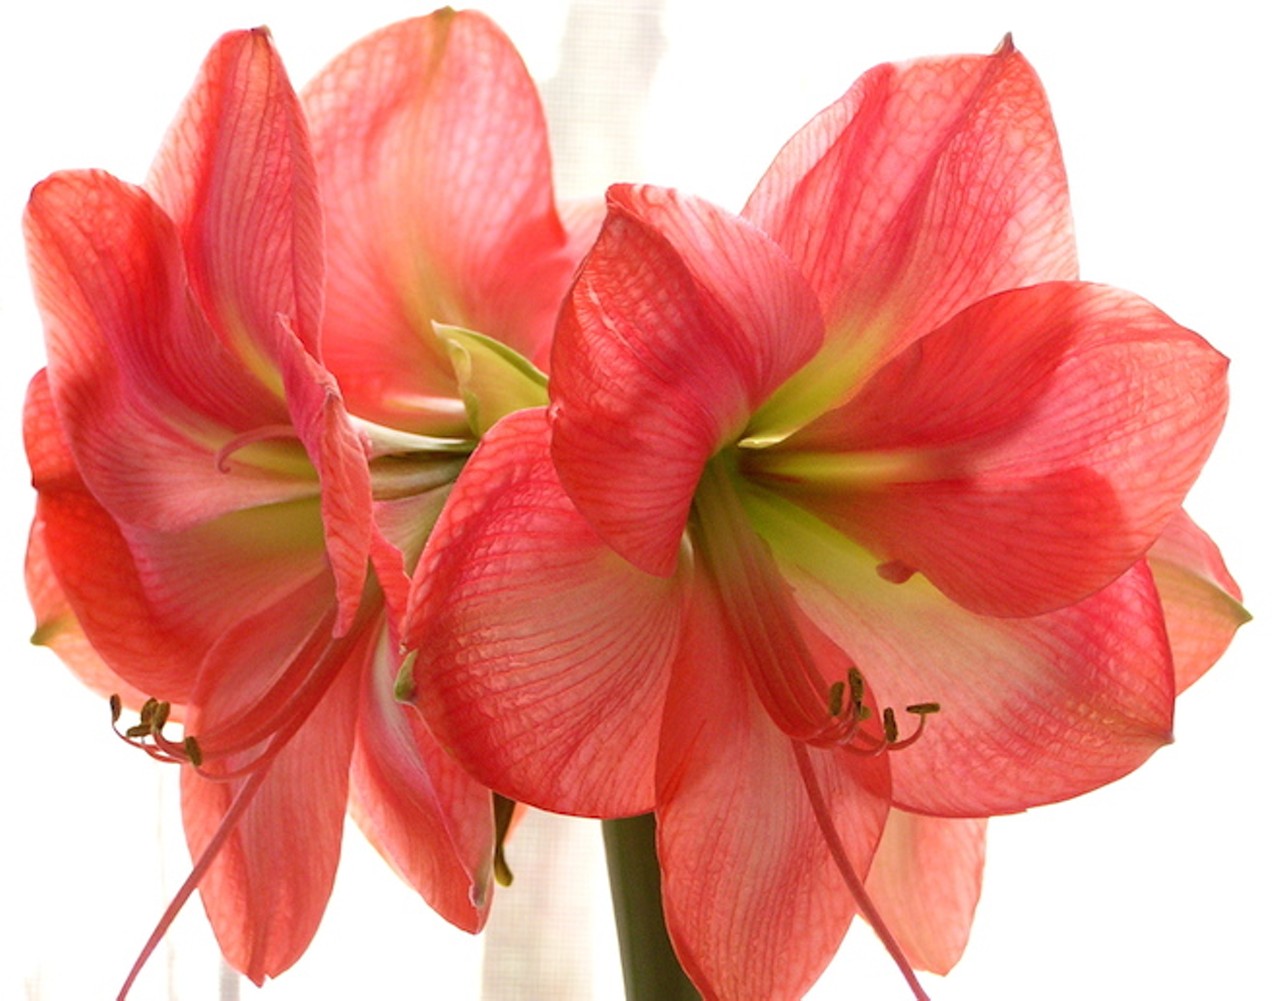 Saturday, Dec. 13Holiday Celebration and Amaryllis Festival 2014Garden tours, live music, blooming amaryllis and a variety of bulbs for sale